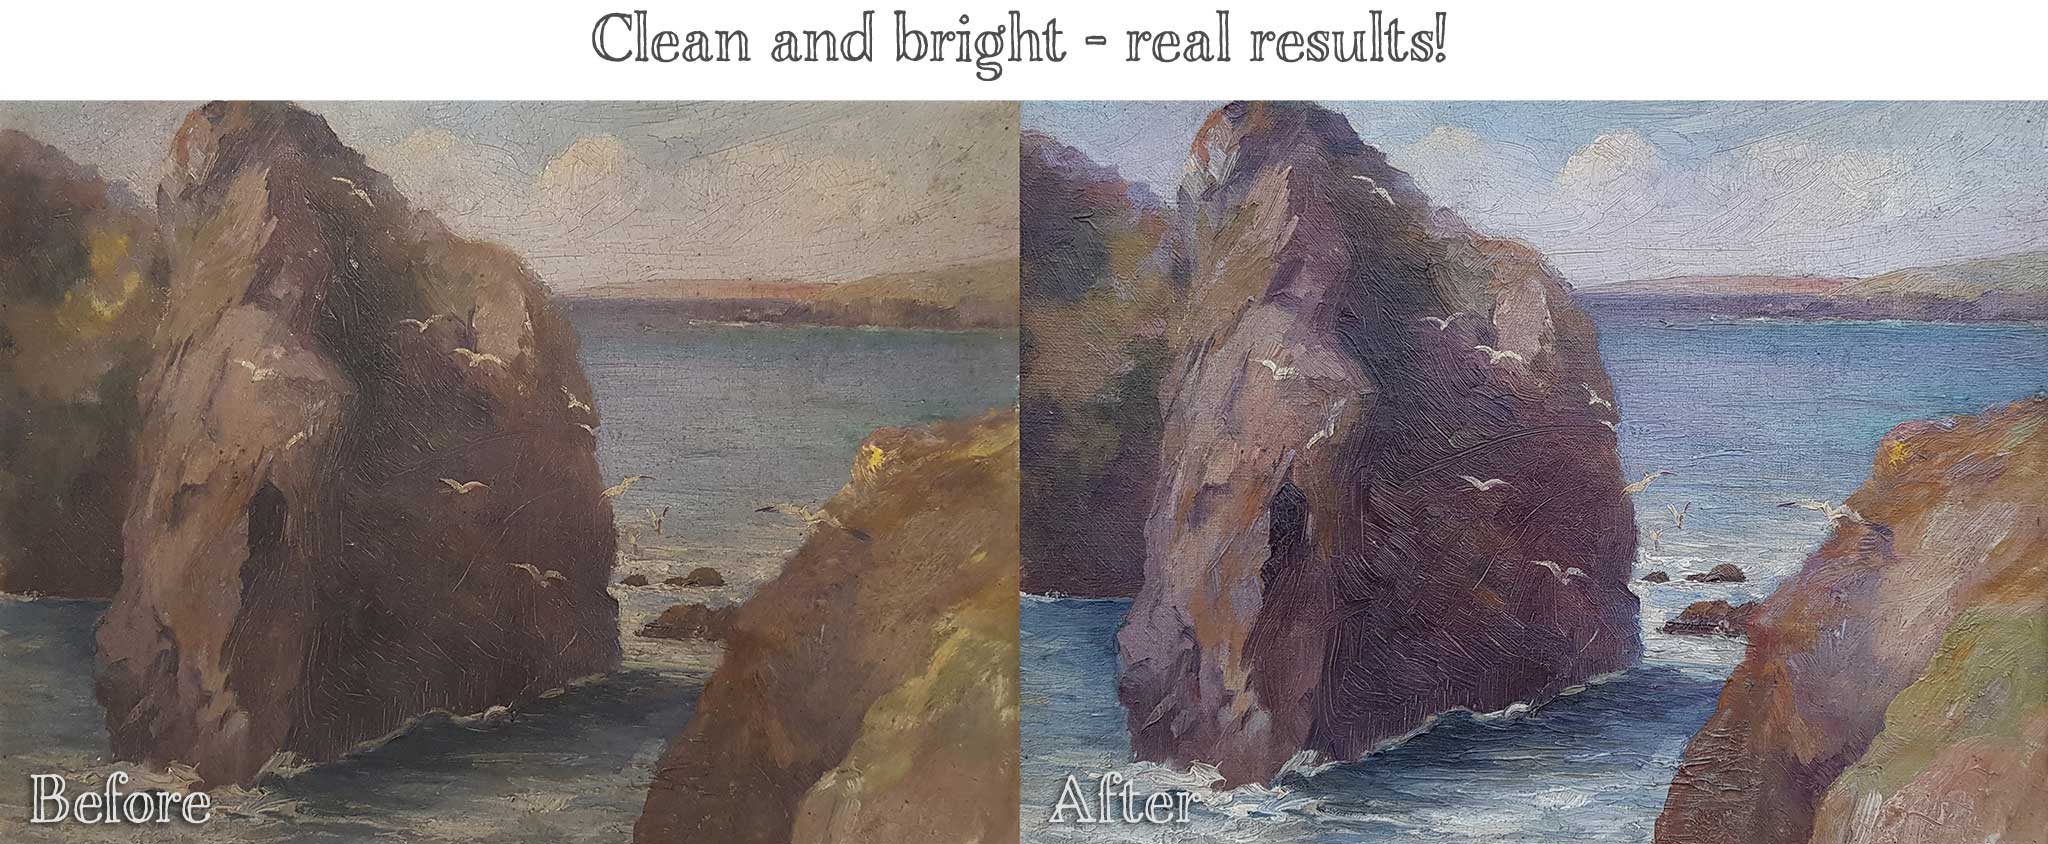 oil painting cleaner - before and after